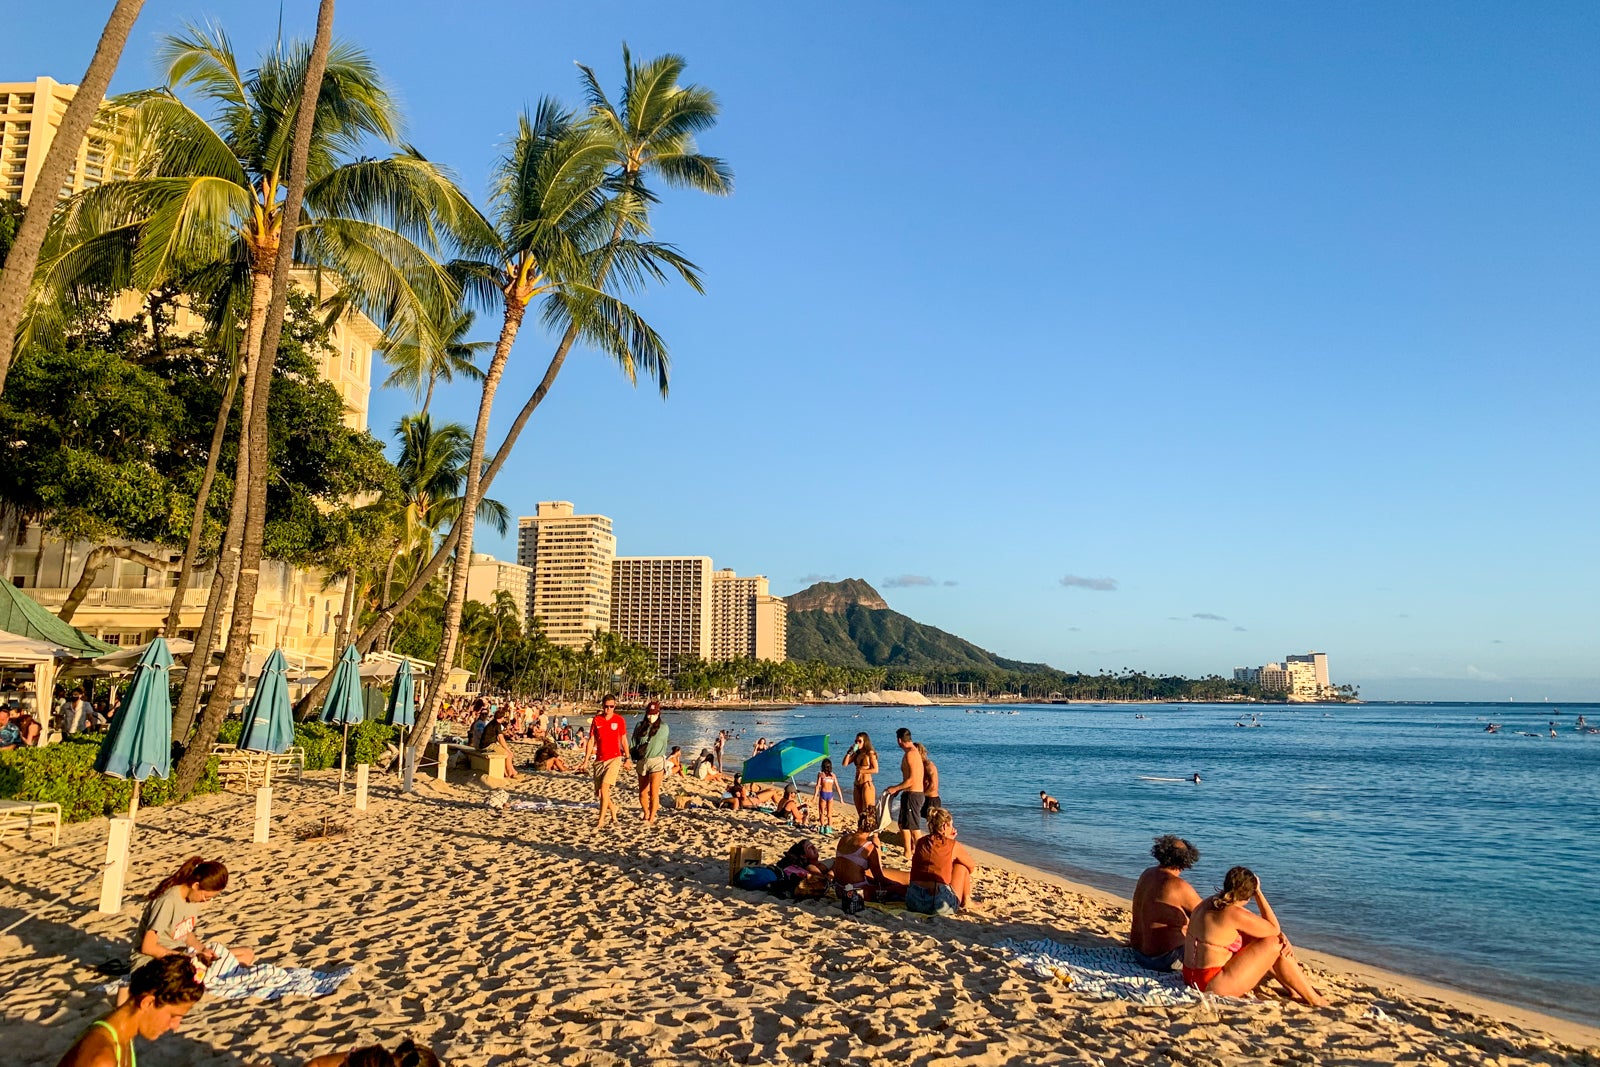 Beach in Hawaii with tourists